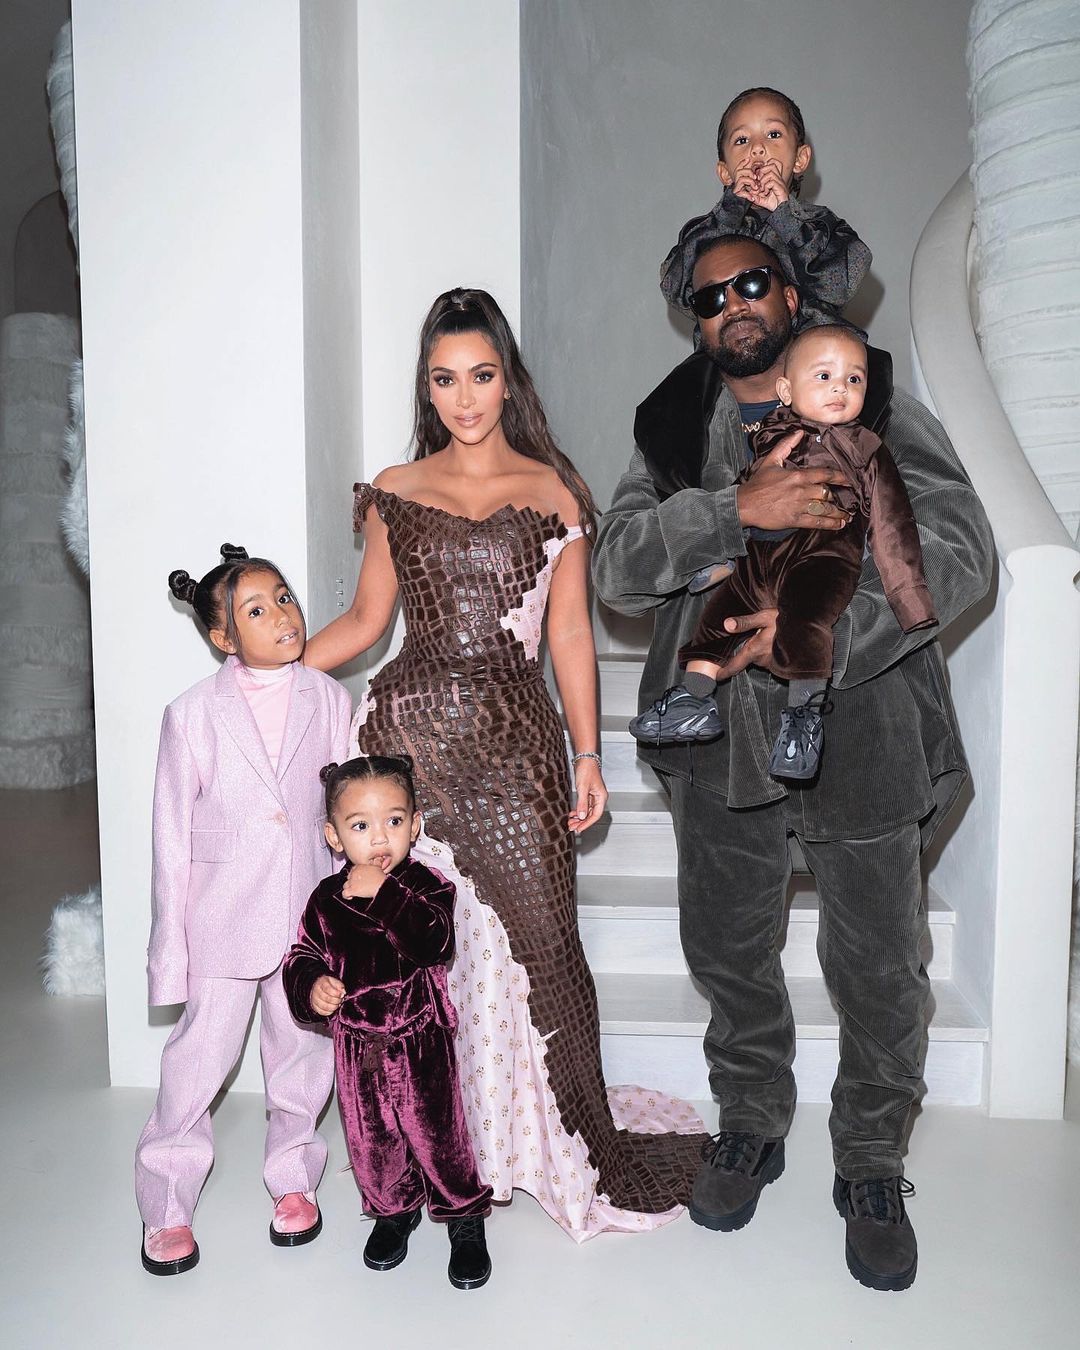 Kim and Kanye West took a group photo with their four children in December 2019